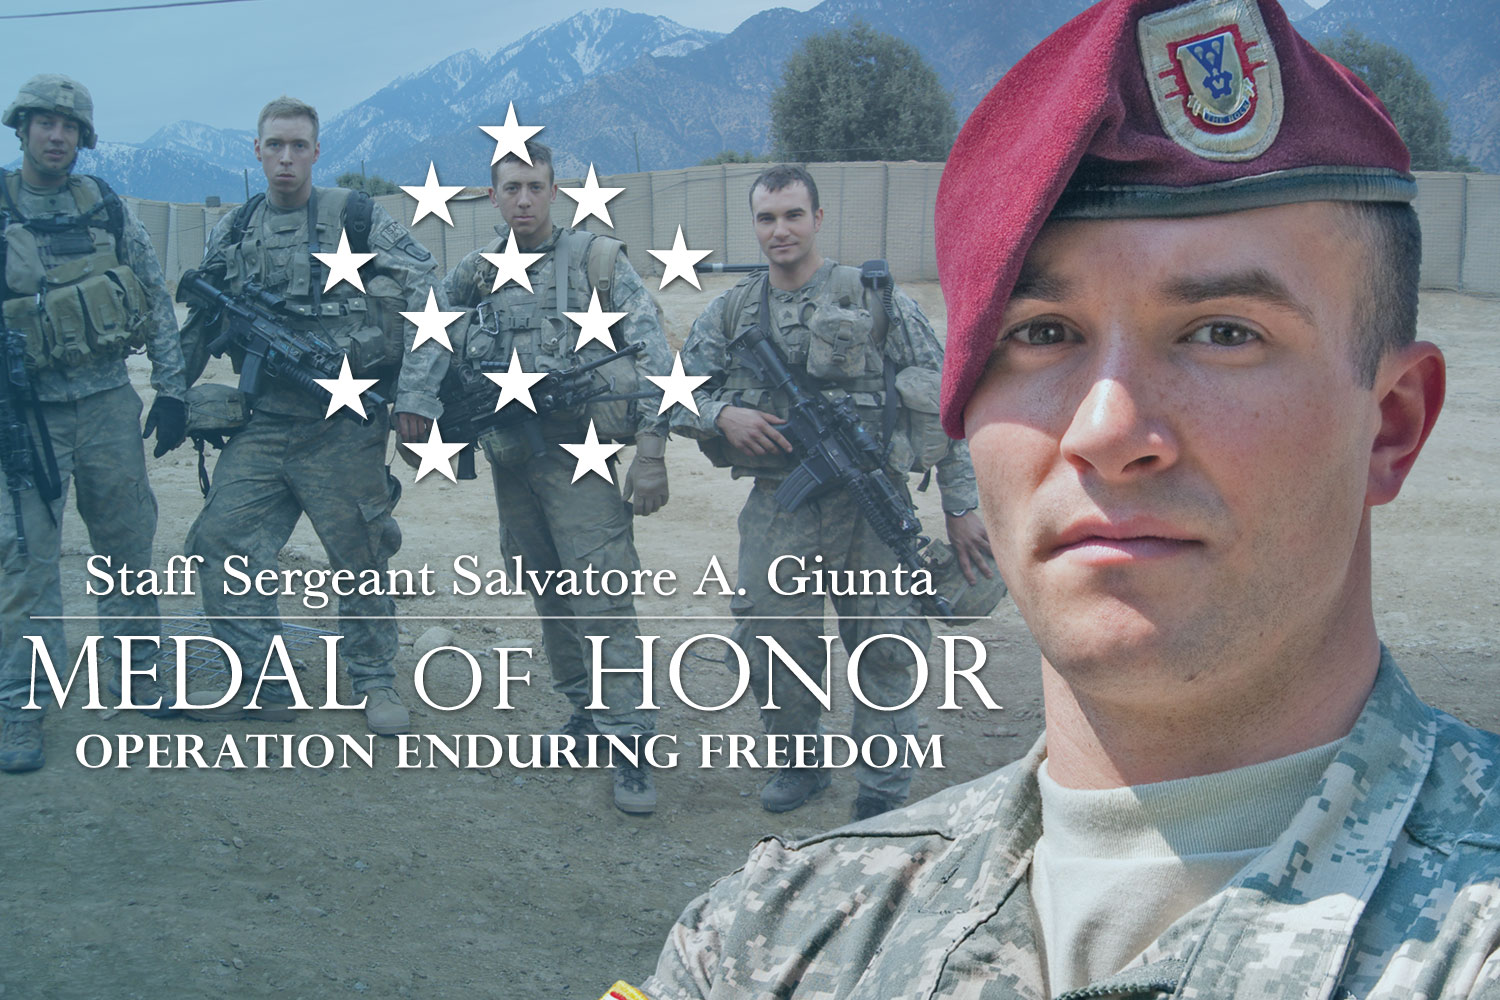 Medal of Honor - Staff. Sgt. Salvatore Giunta - United States Army - 101116